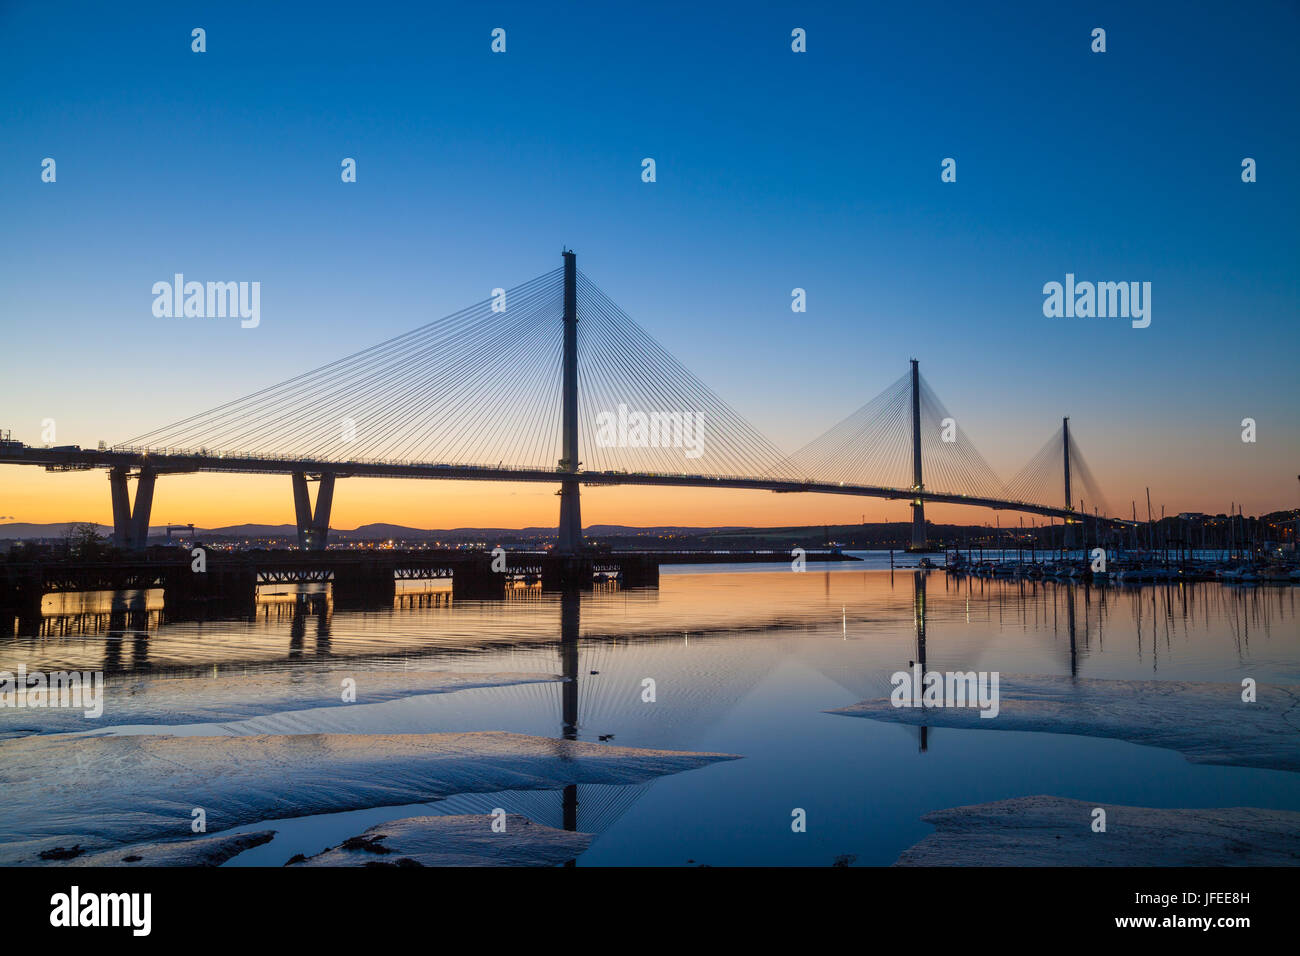 The Queensferry Crossing Bridge over the Firth of Forth near Edinburgh. Stock Photo